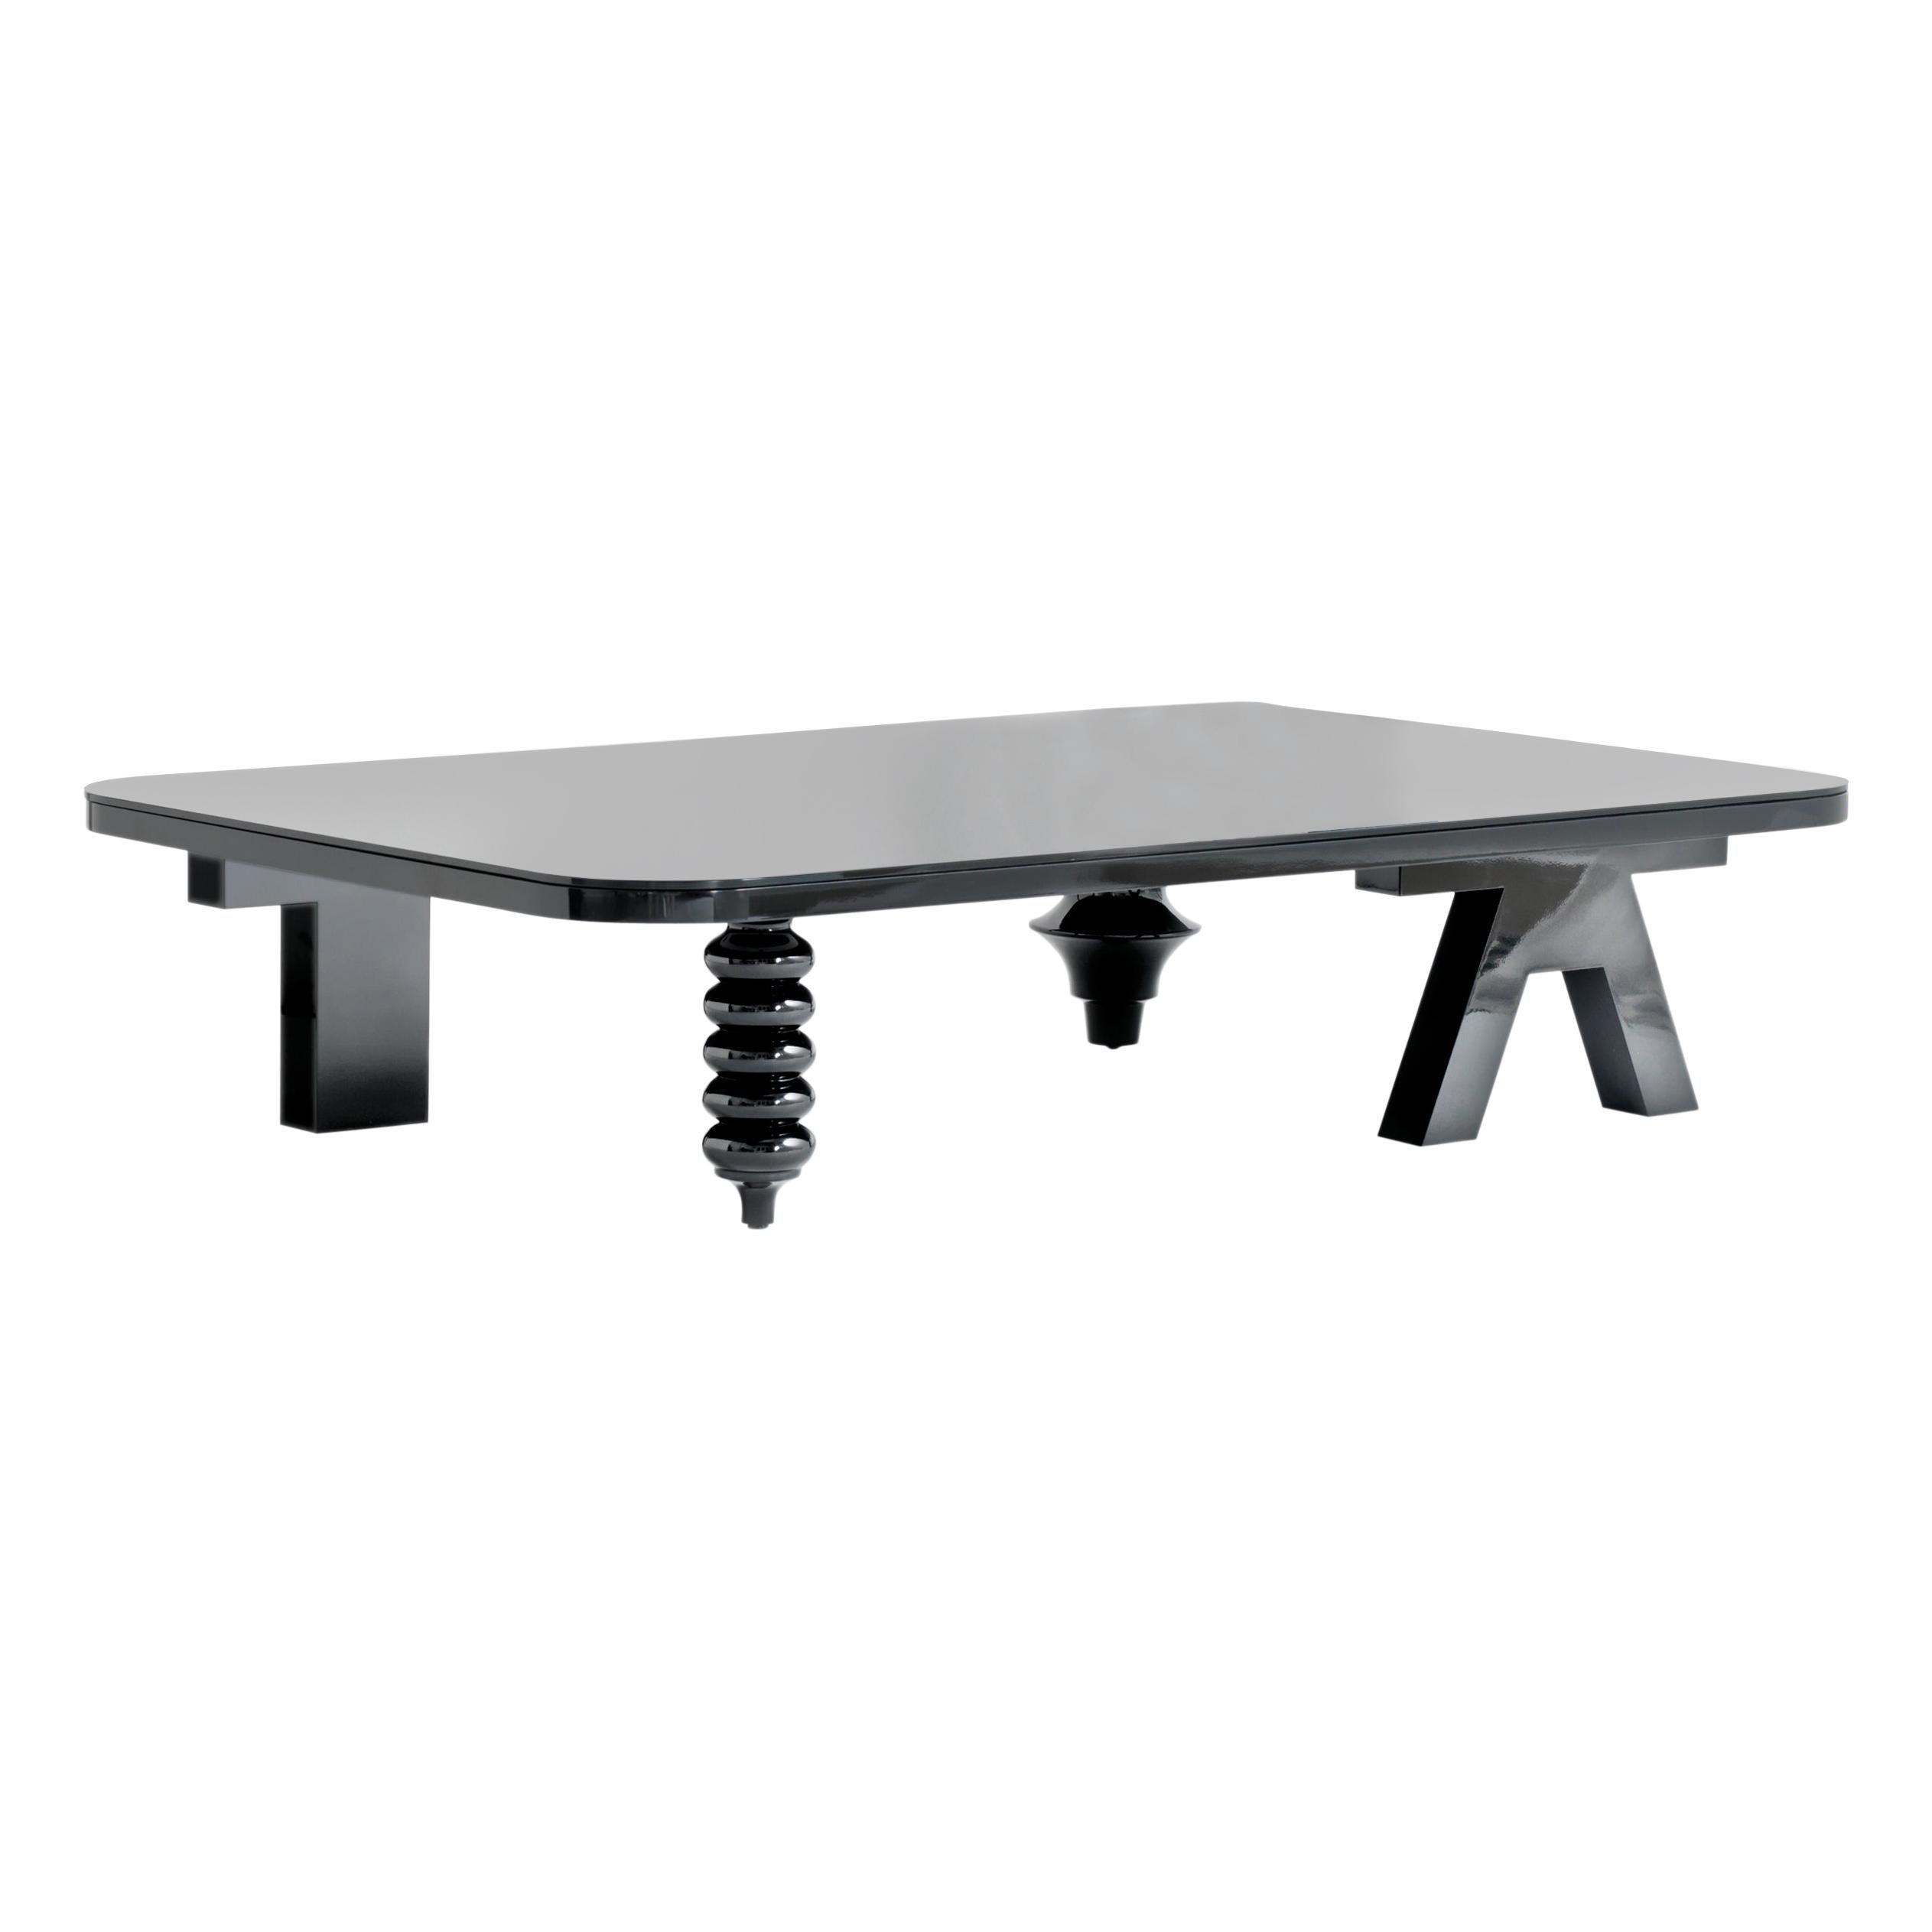 Rectangular low coffee table "Multileg" by Jaime Hayon high gloss black lacquer For Sale